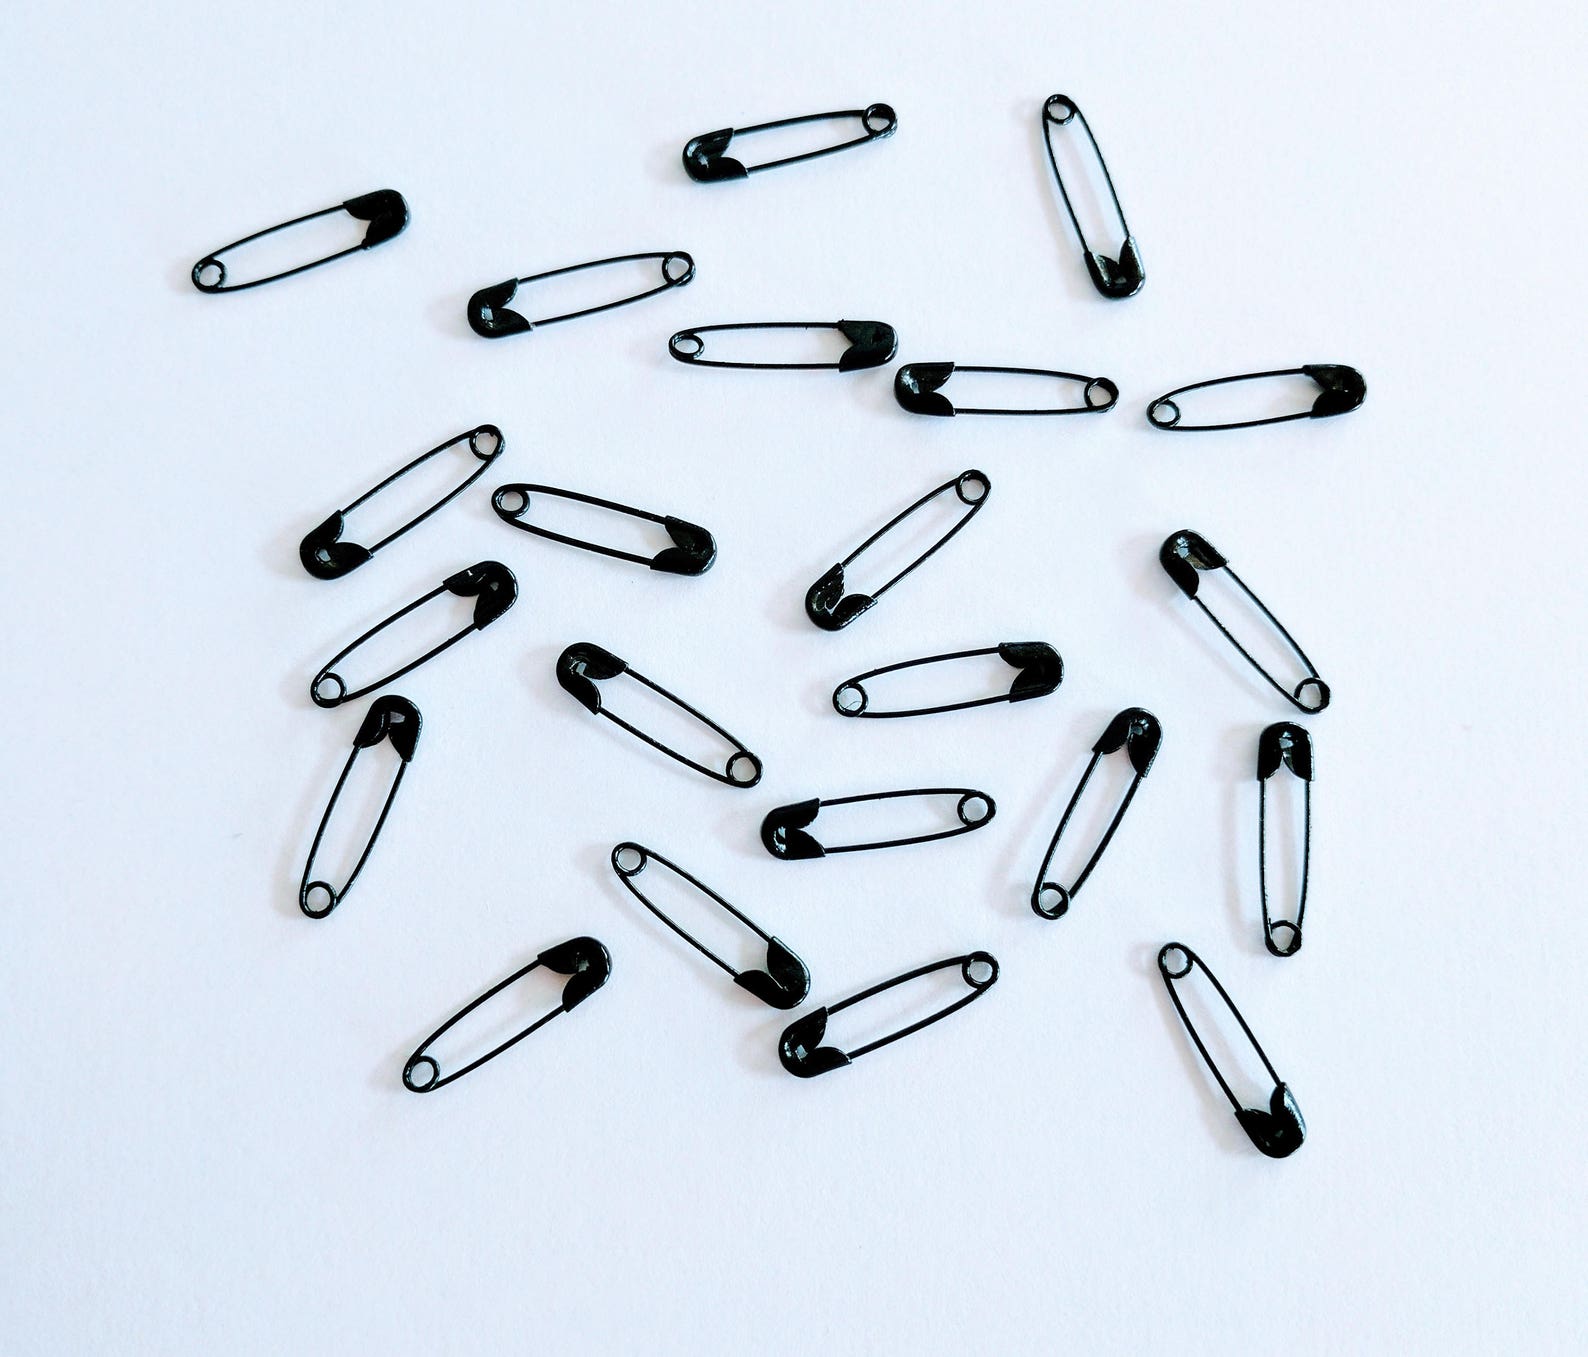 100 Very Small Black Safety Pins 3/4 Inch Long Safety Pins. - Etsy